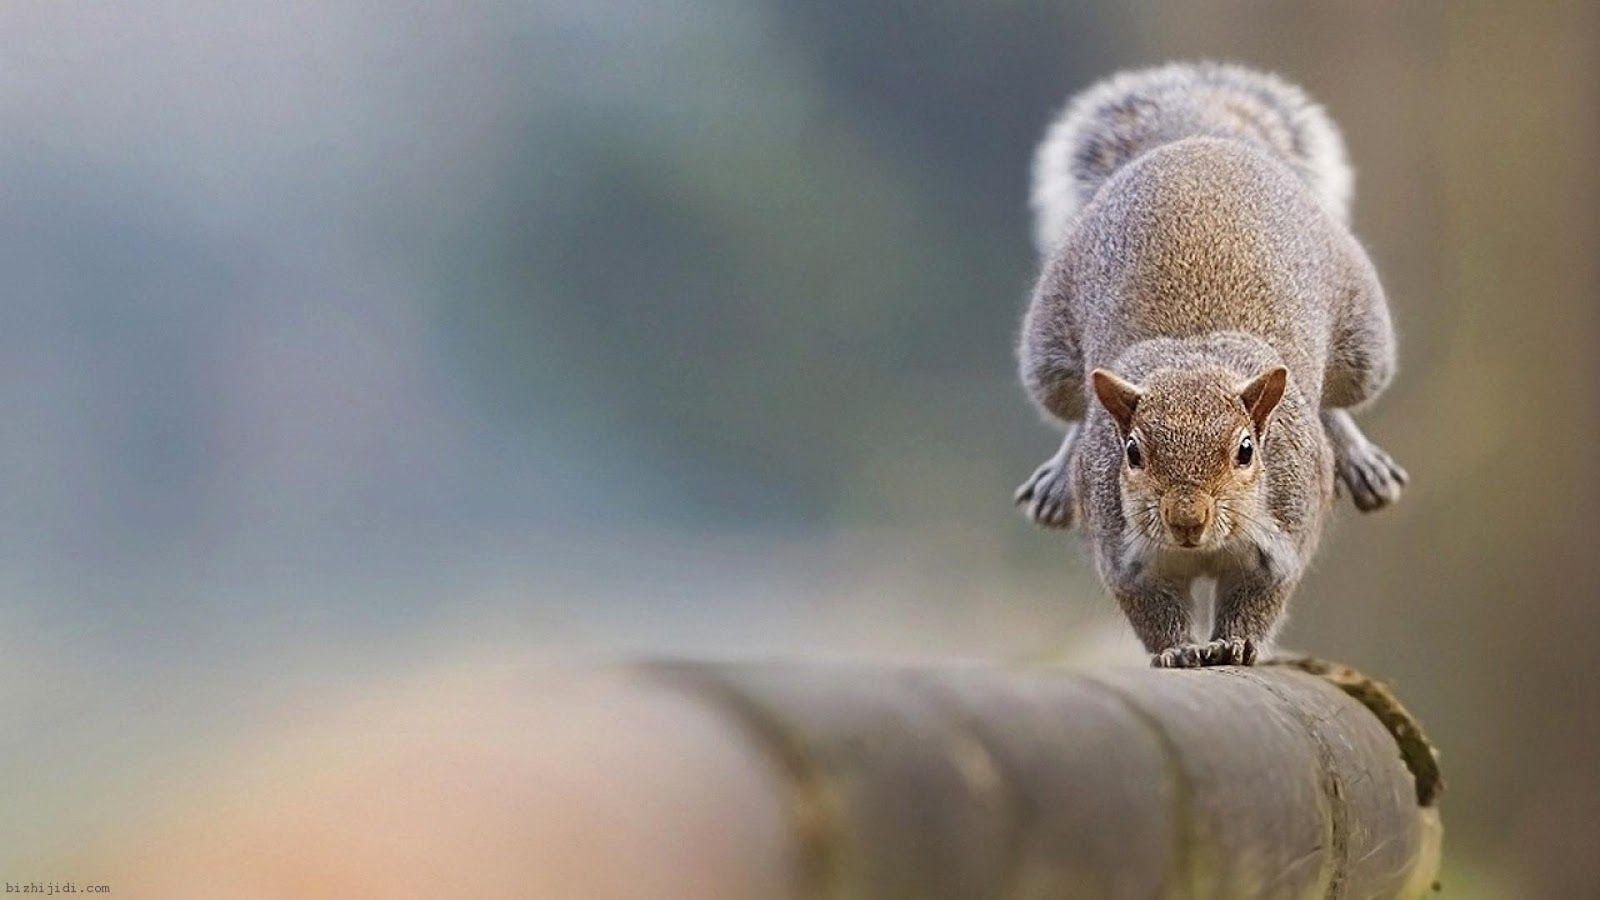 Your Wallpaper Squirrel Wallpapers